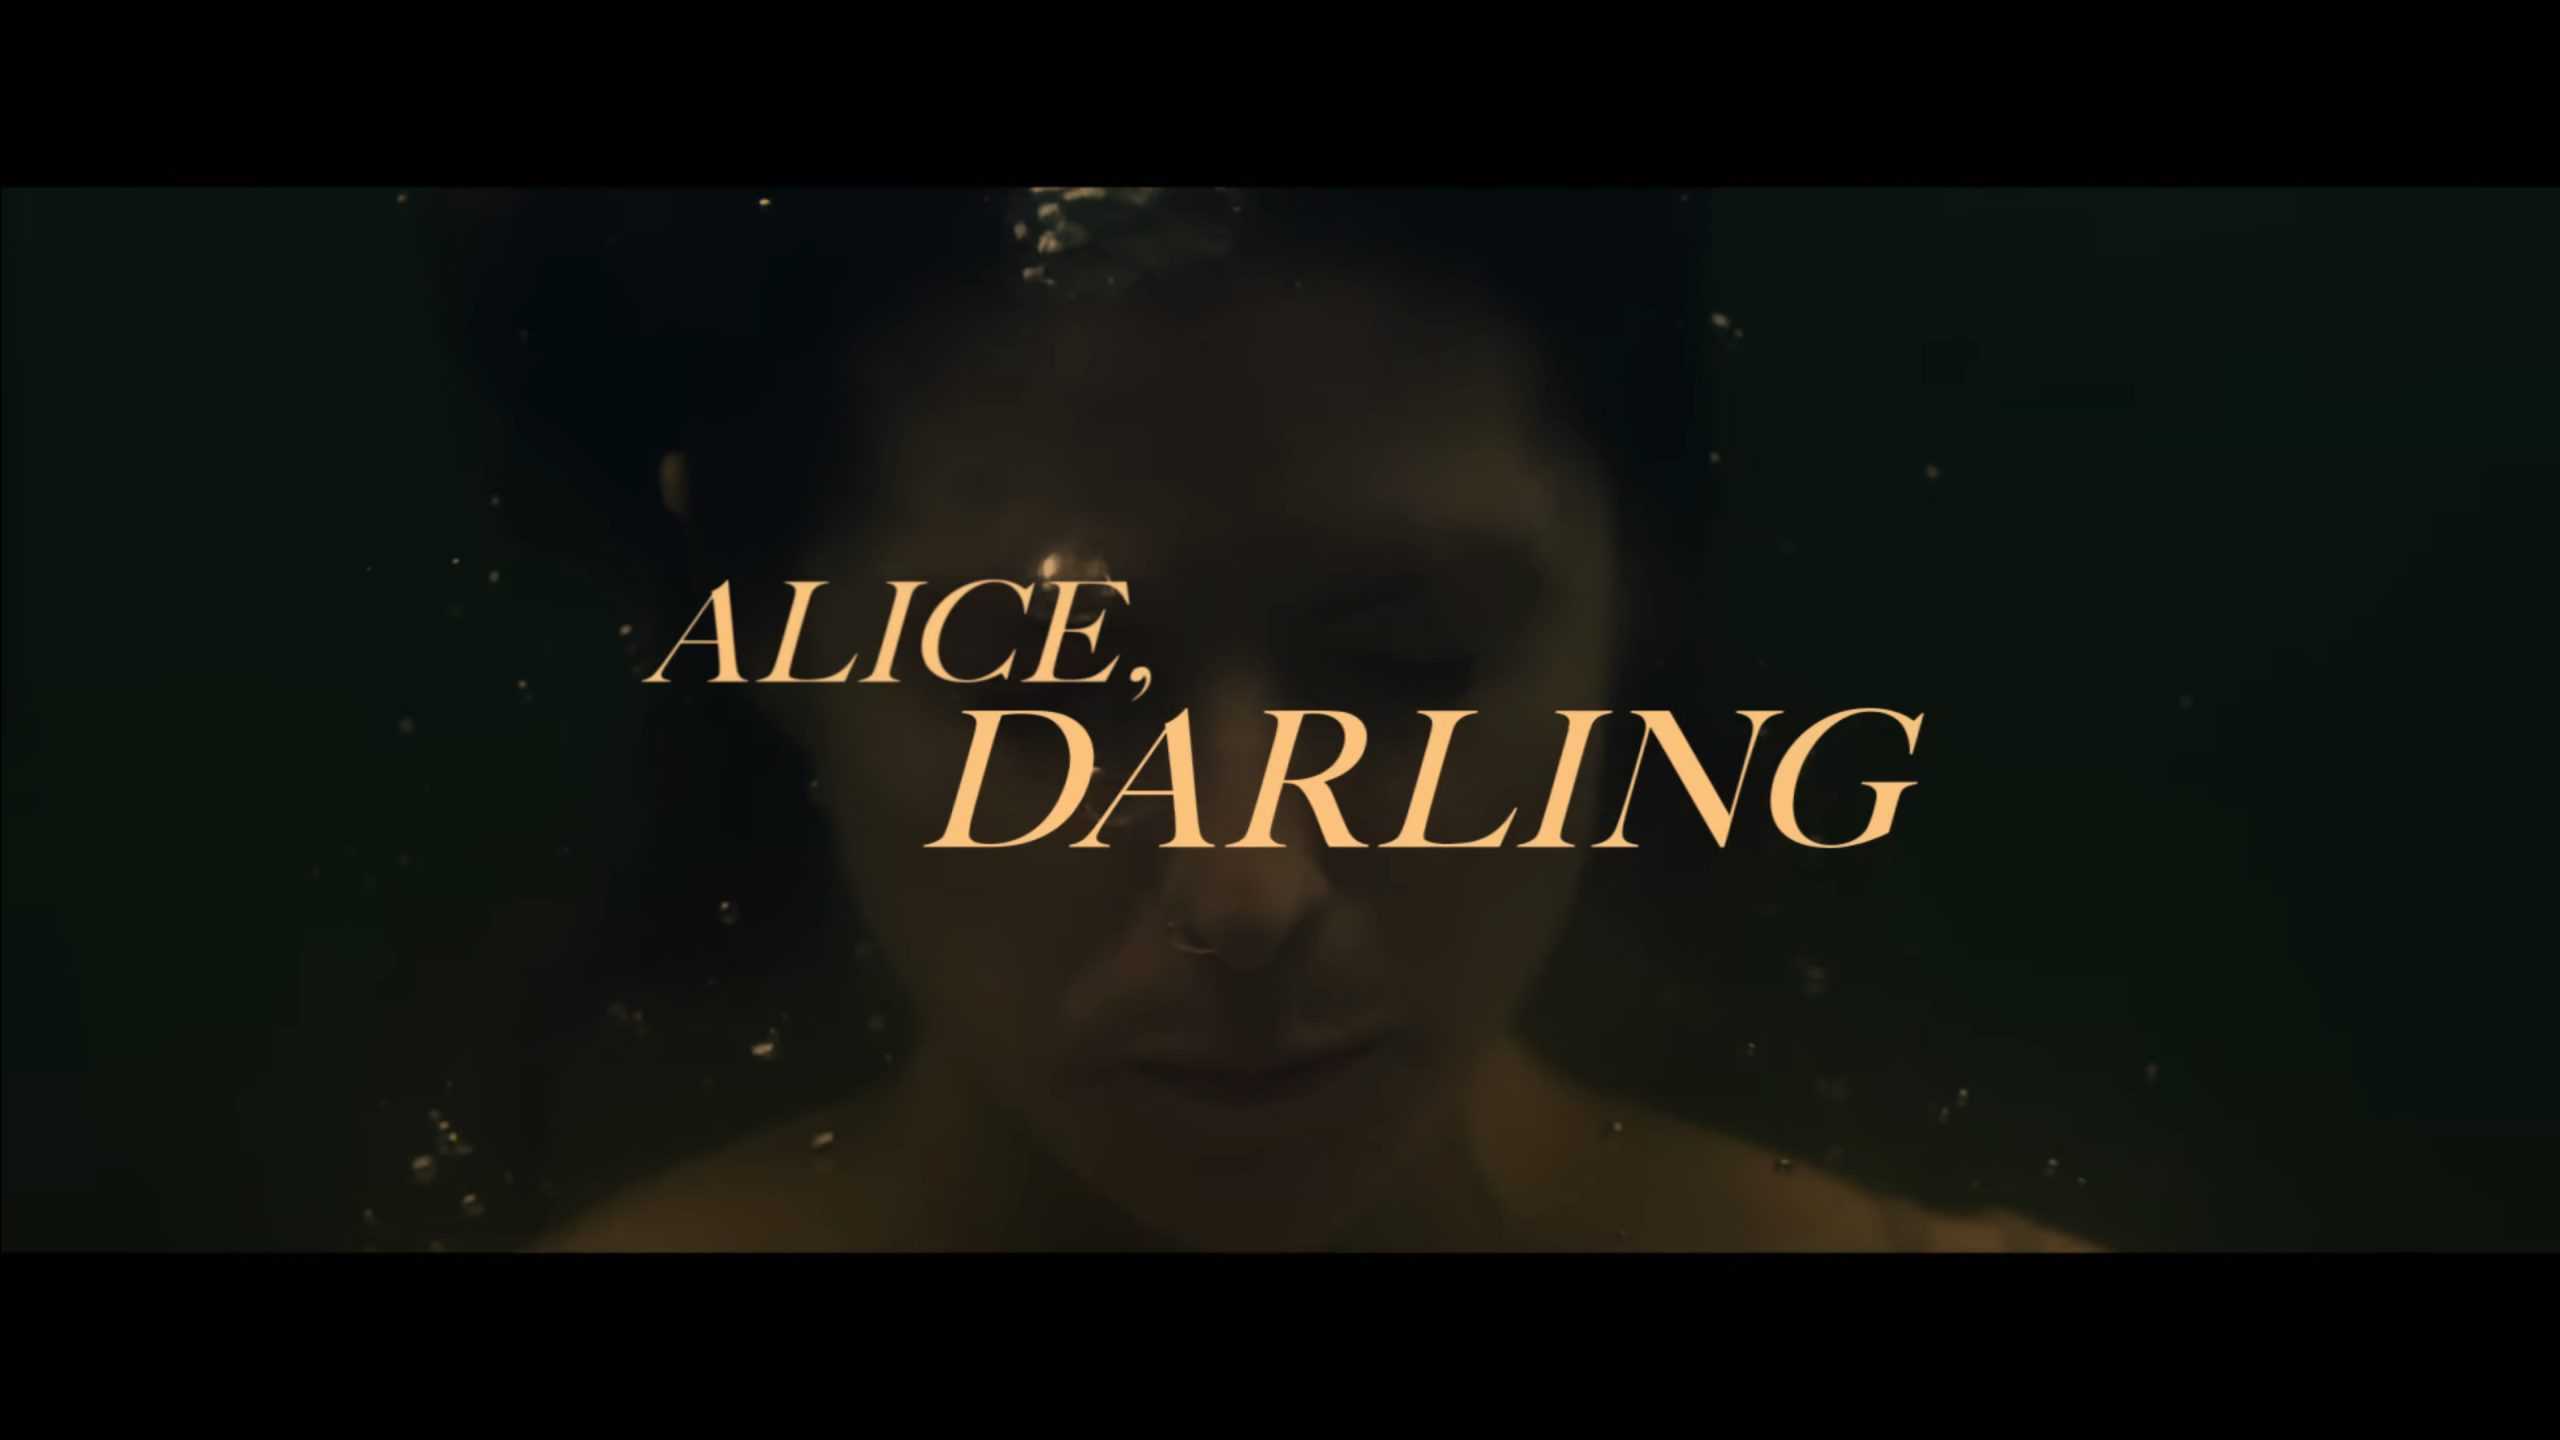 Title Card for "Alice, Darling"